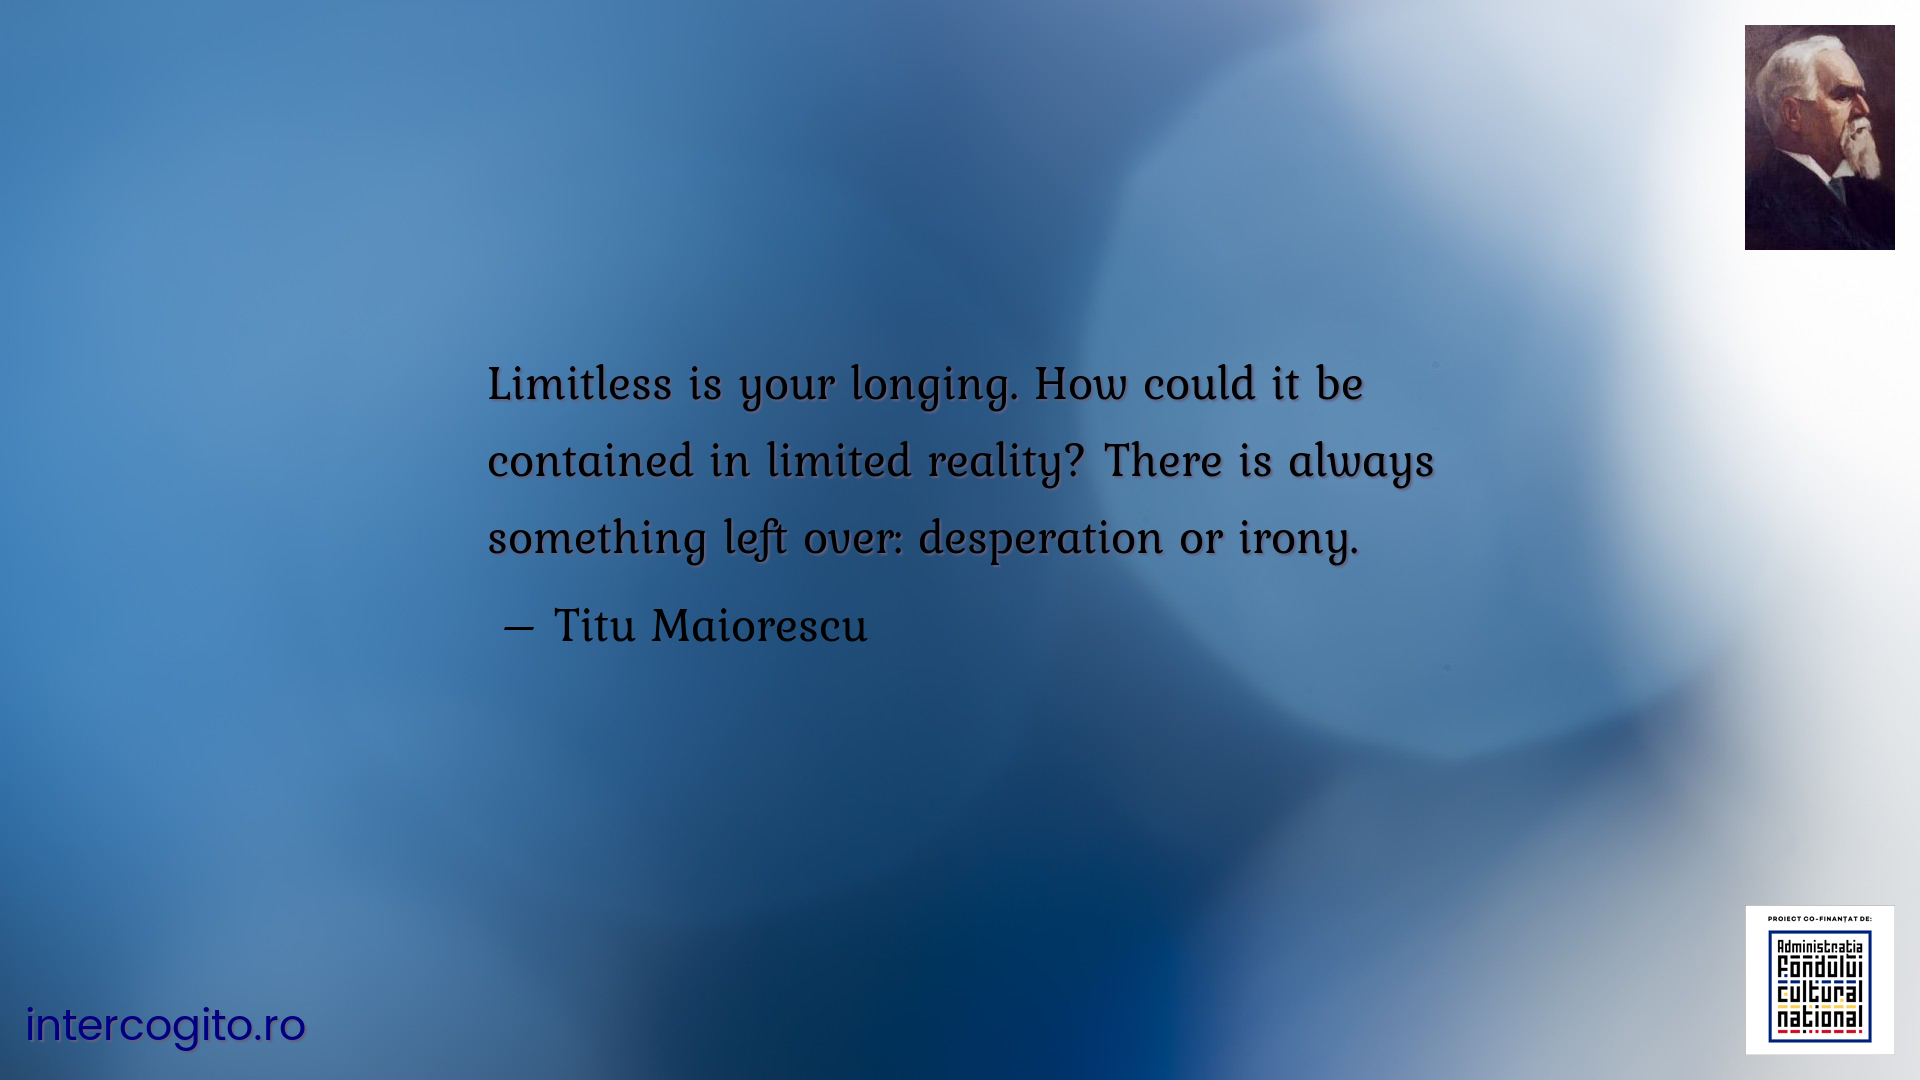 Limitless is your longing. How could it be contained in limited reality? There is always something left over: desperation or irony.